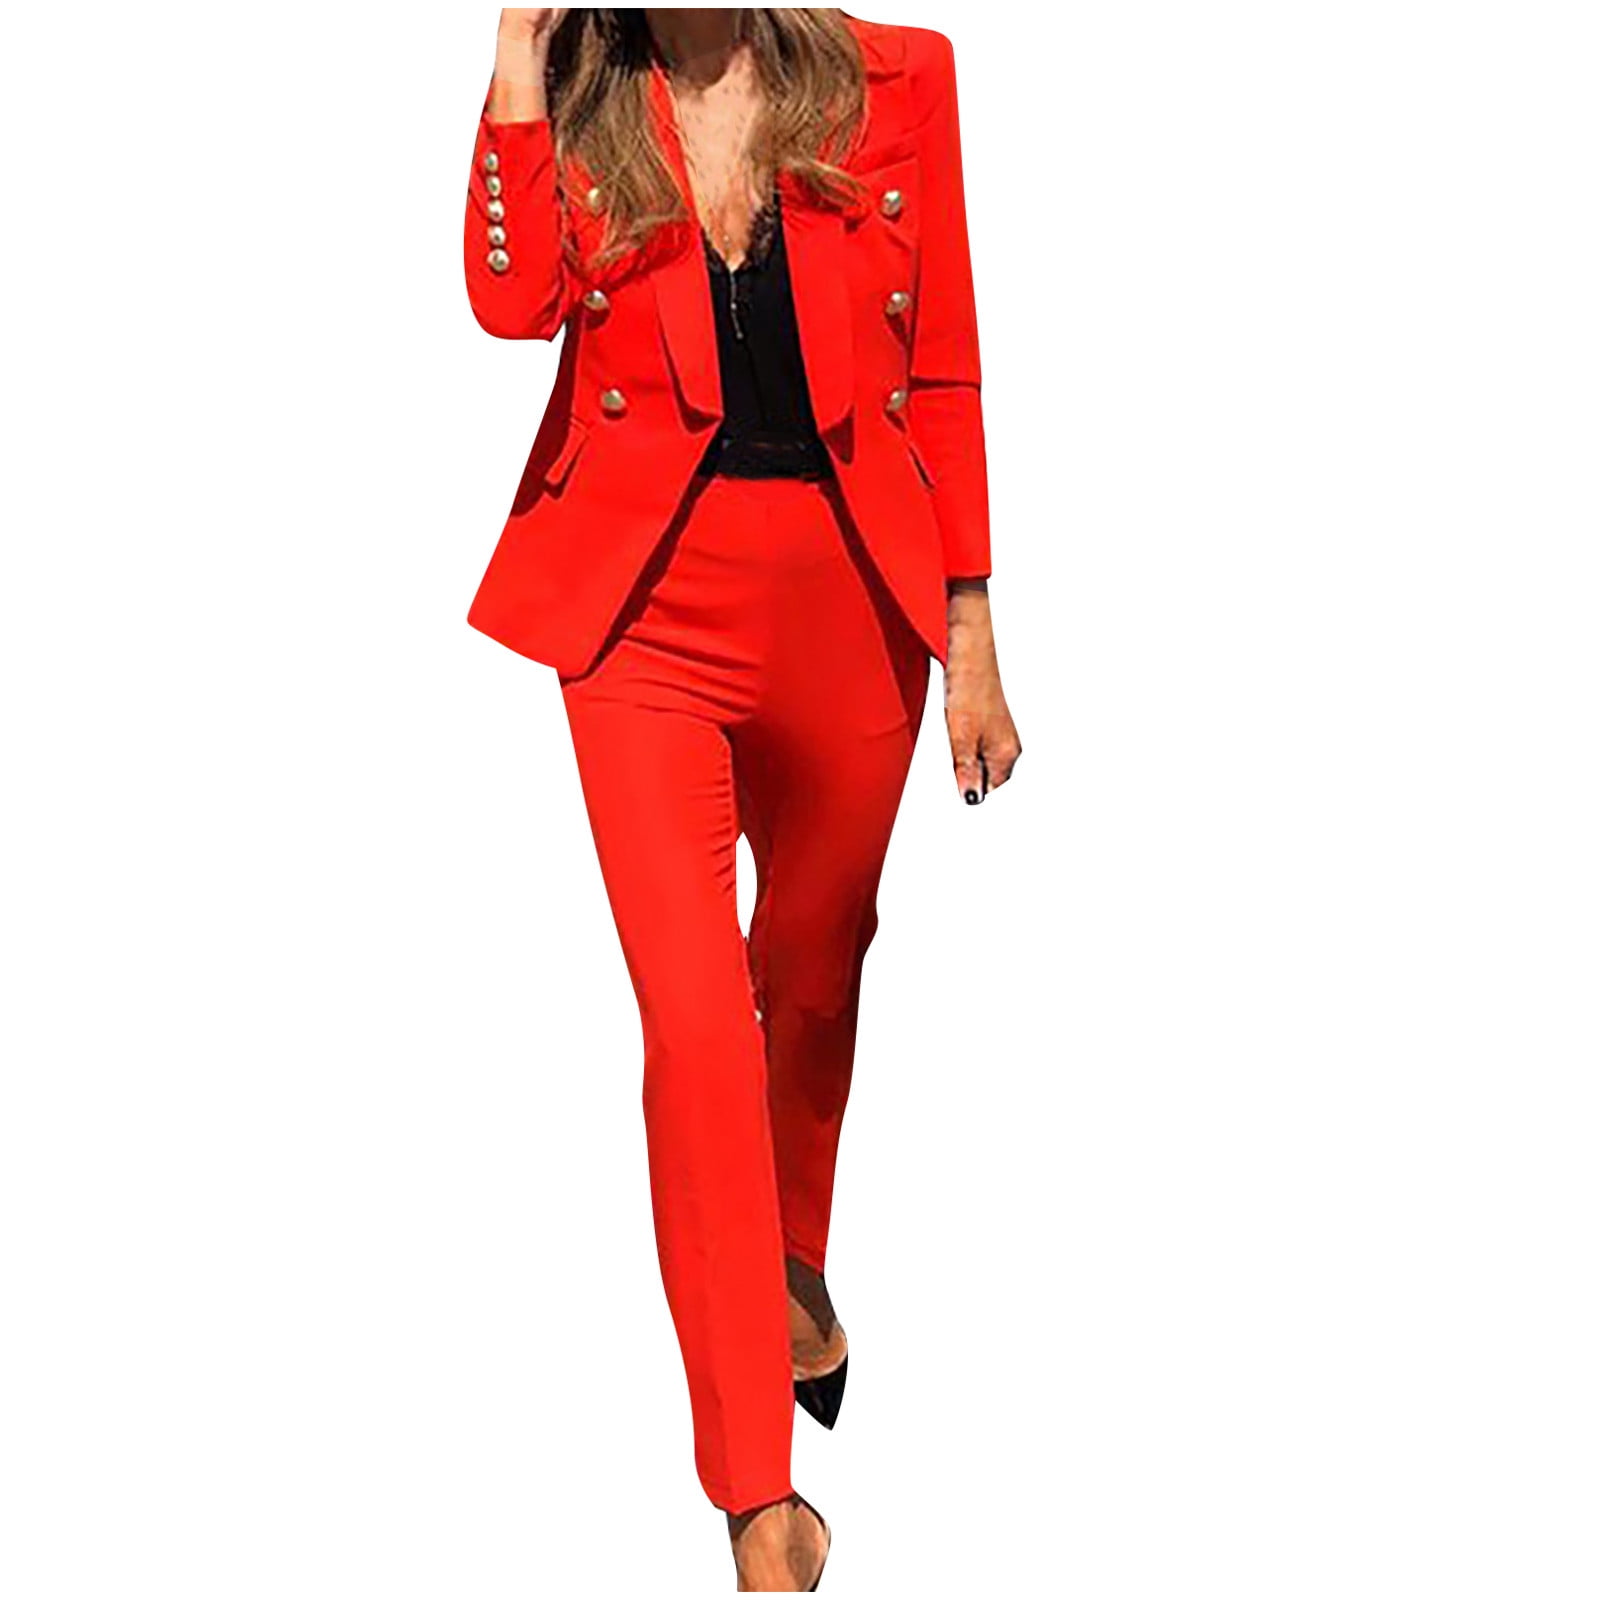 Women's Suits, Elegant Outfits and Business Wear